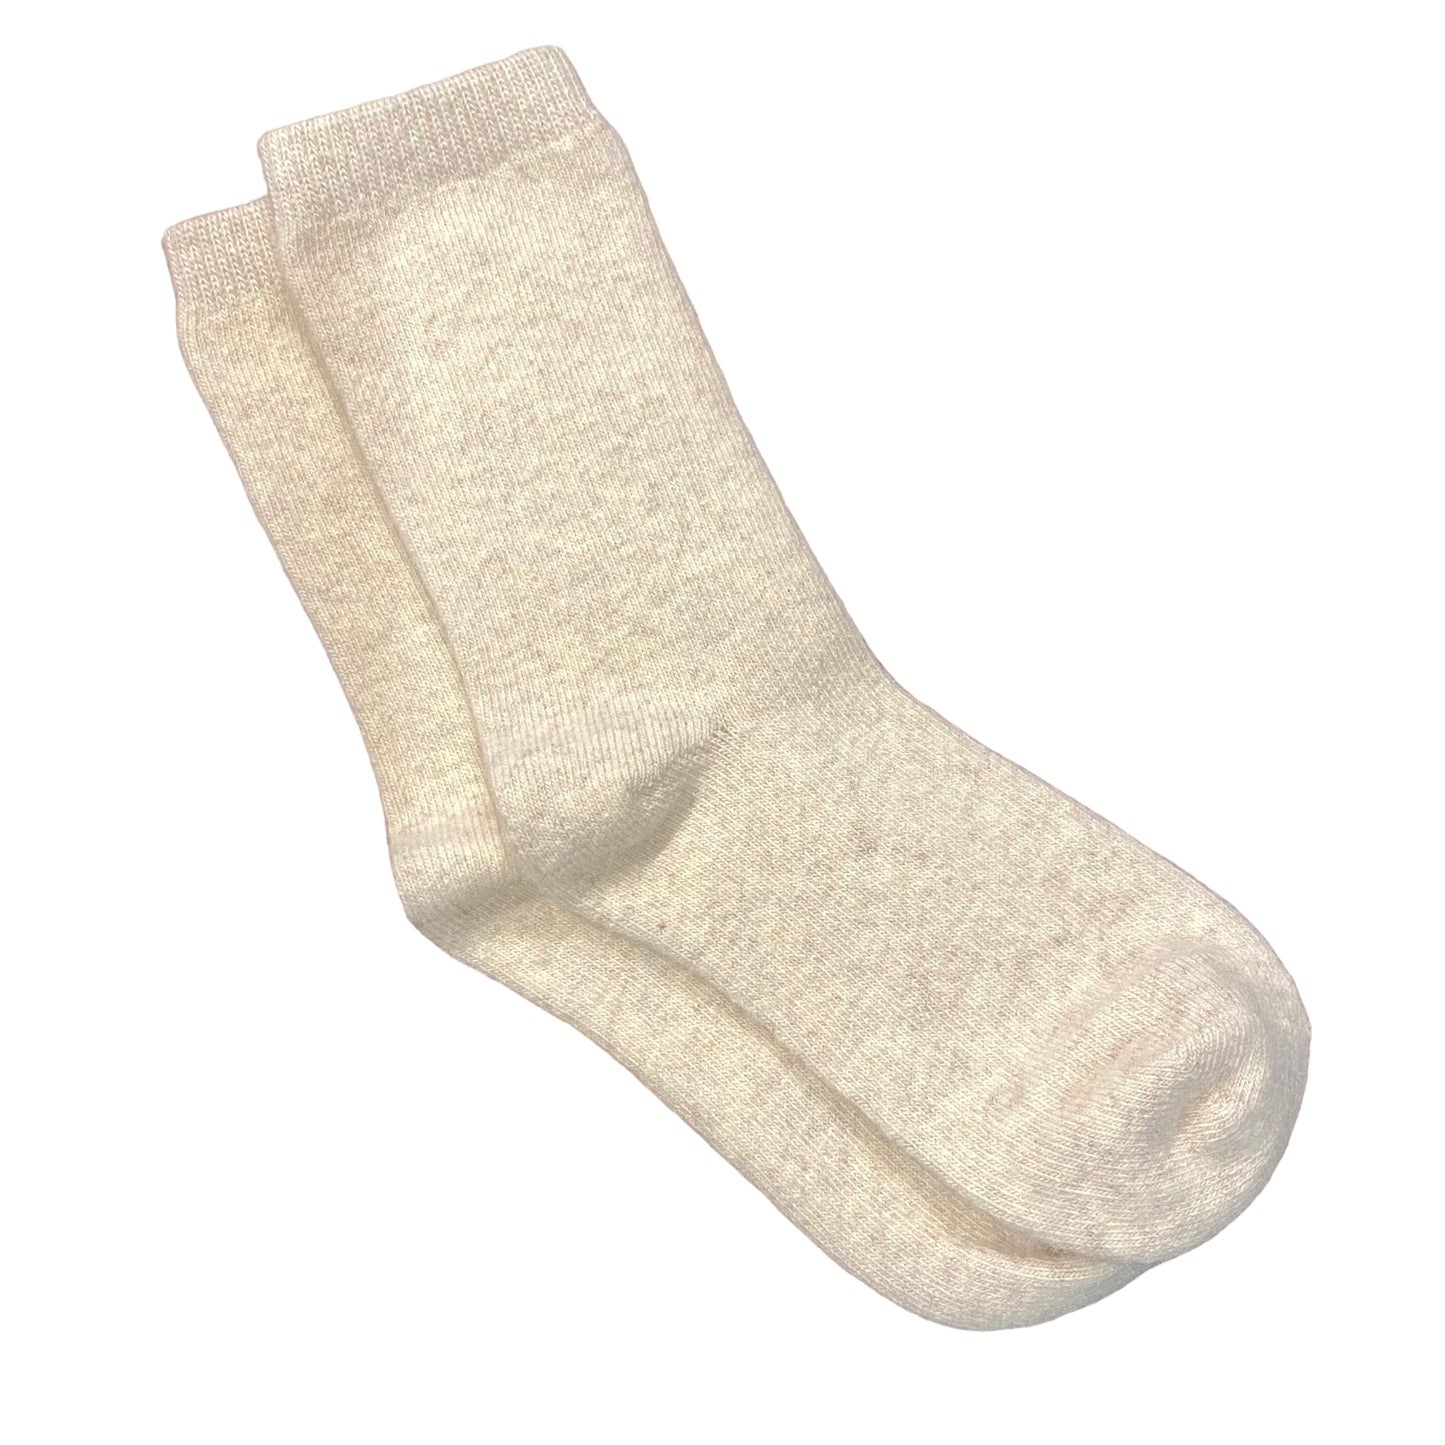 Women's Cashmere Lambswool Blend Socks - Pinks and Tan (3 Pairs)